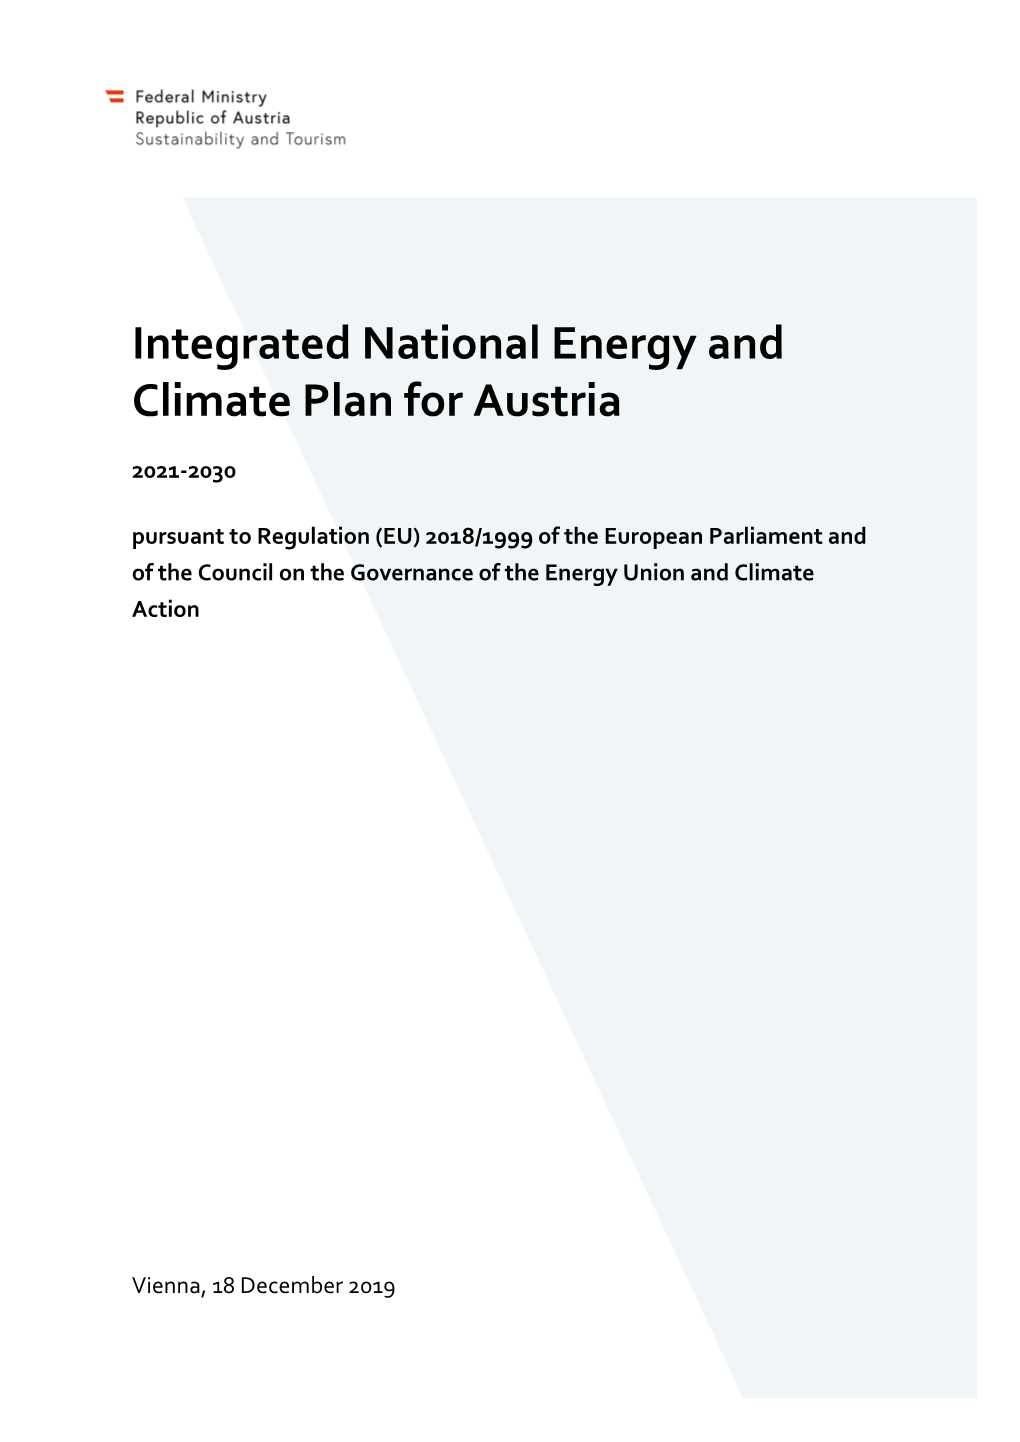 Integrated National Energy and Climate Plan for Austria